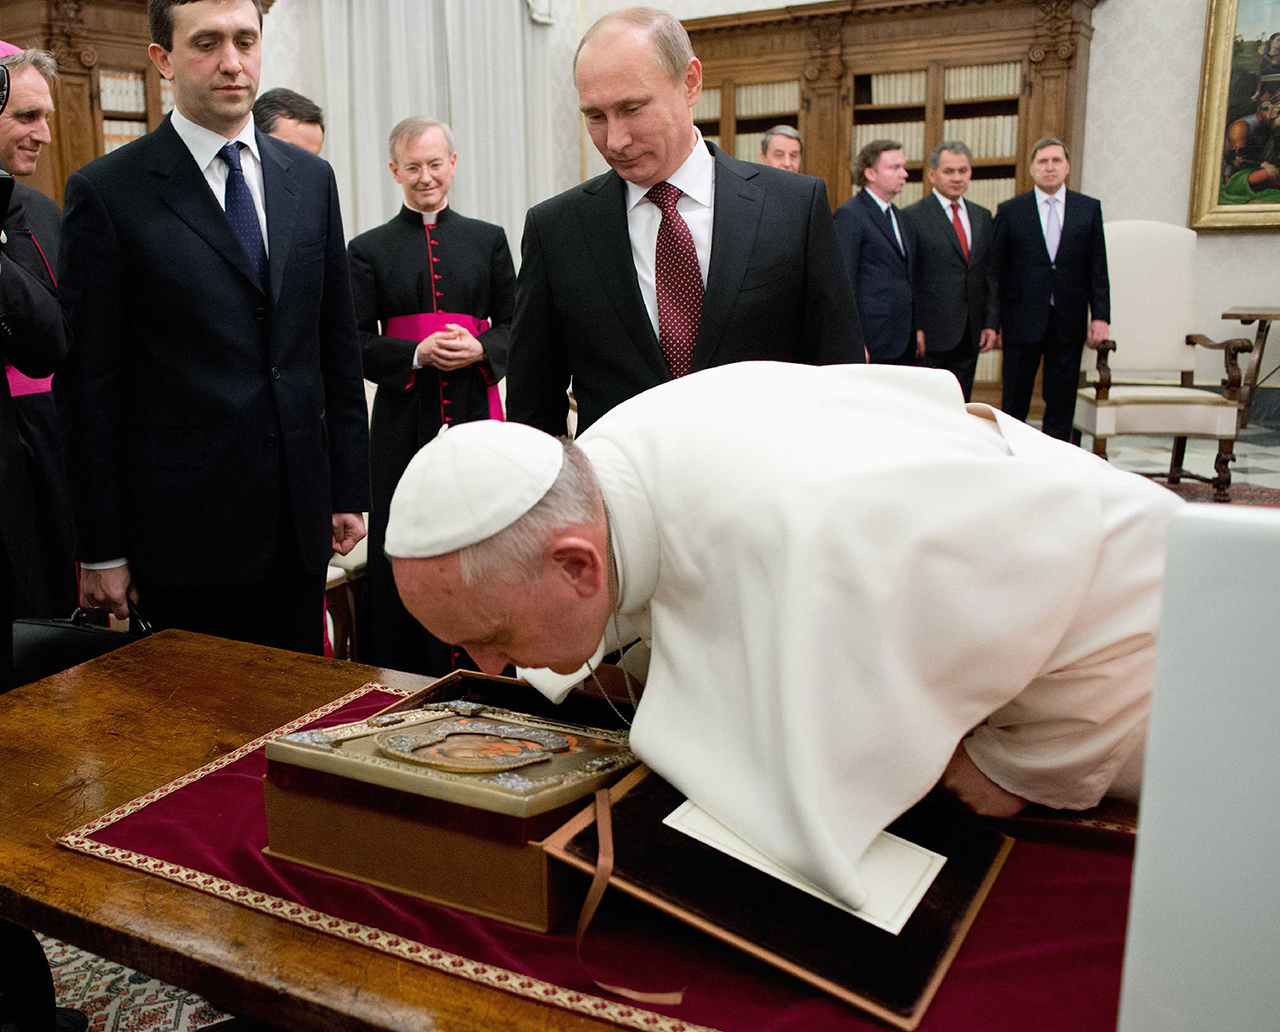 Pope Francis exchangse gifts with Russia's President Vladimir Putin during a private audience at the Vatican